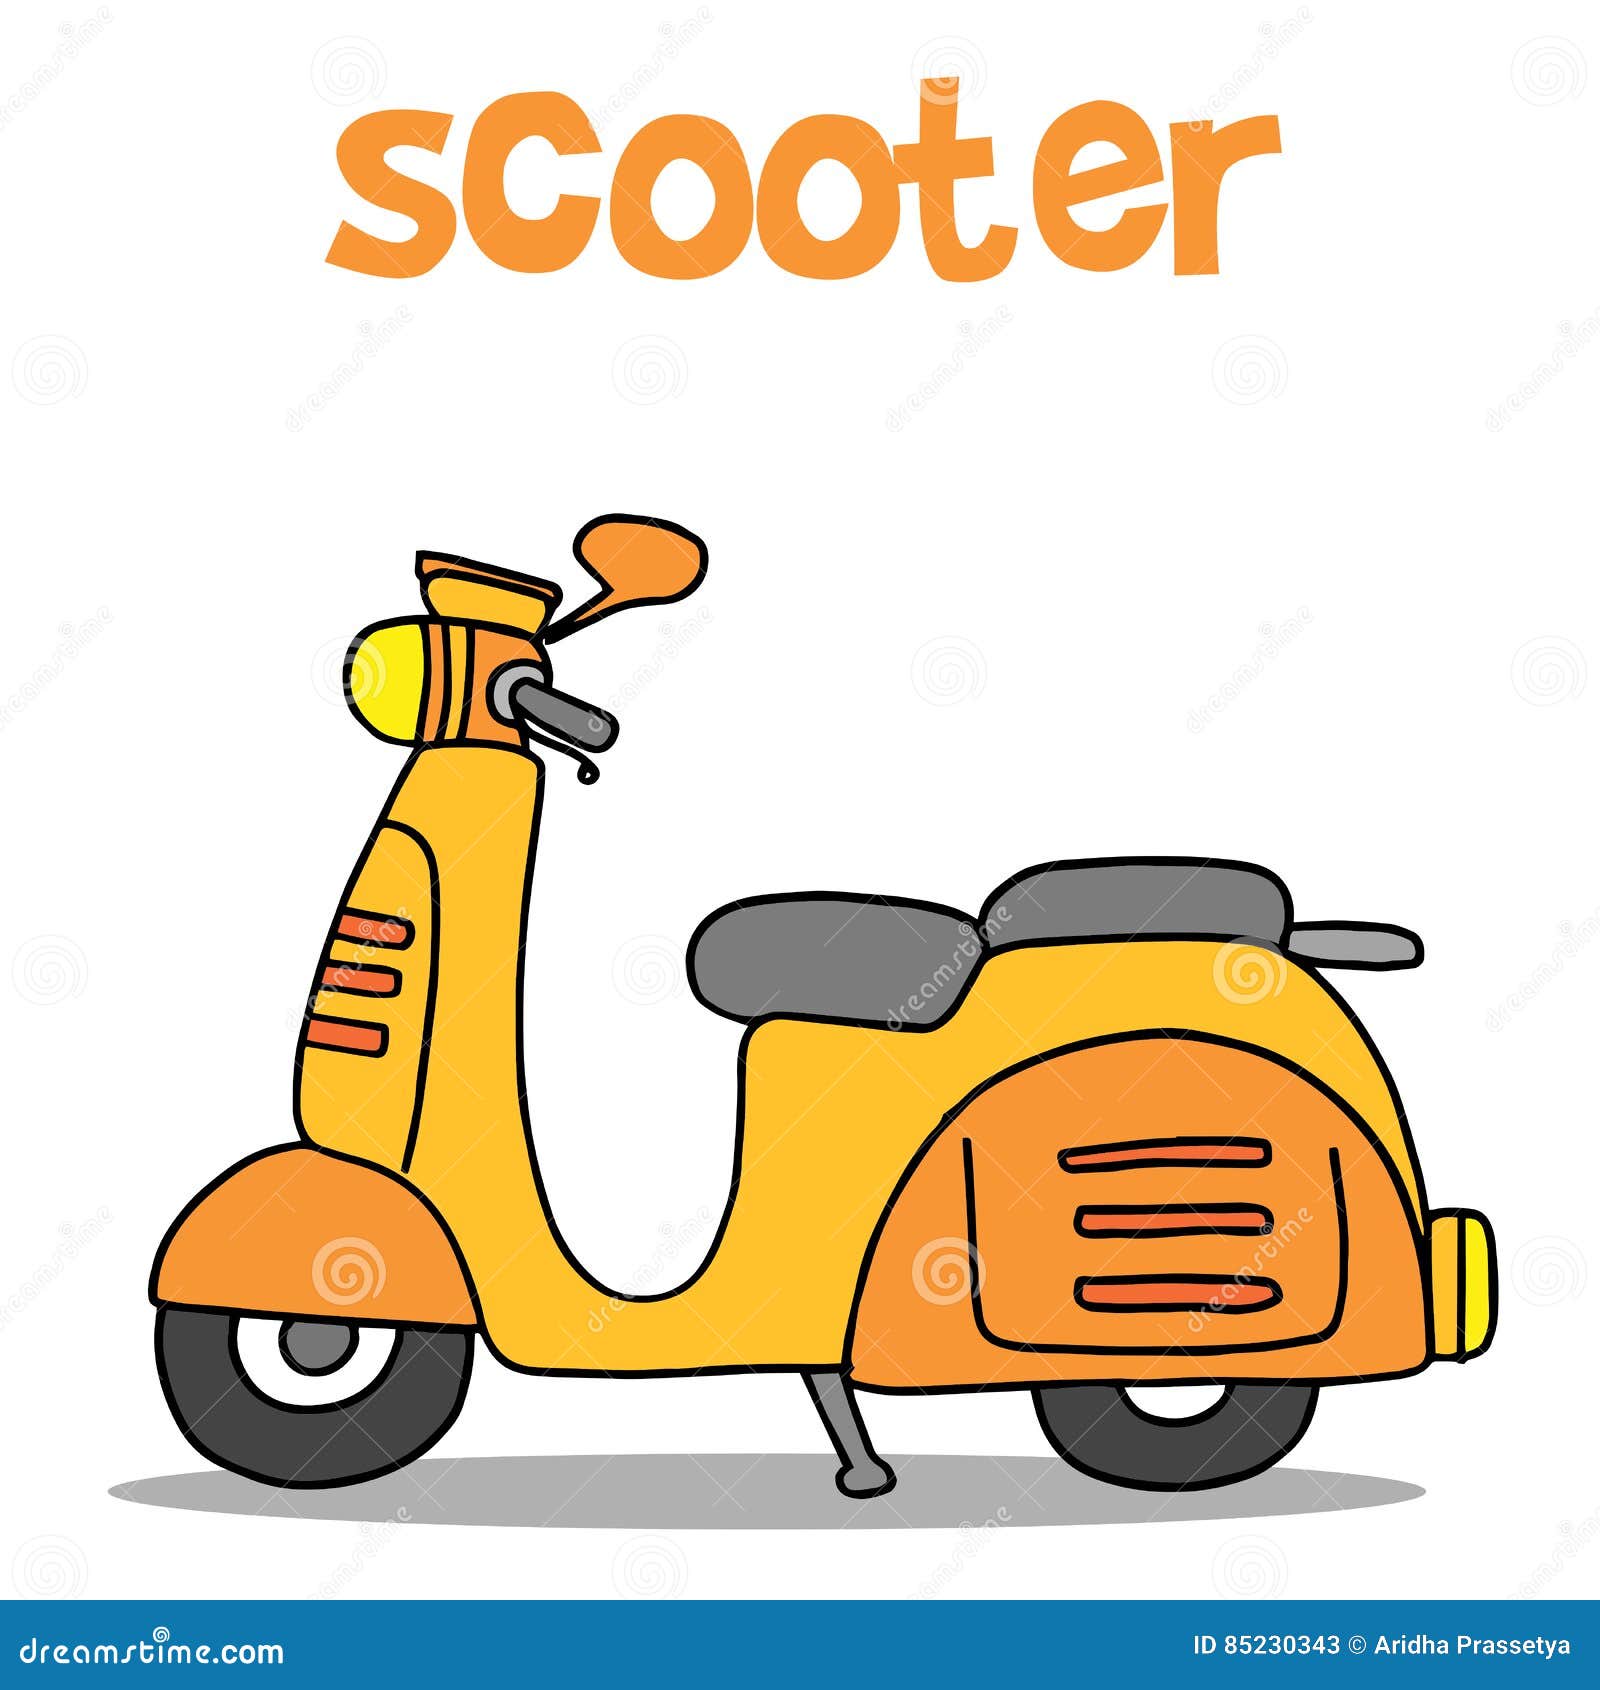 Cartoon of Scooter with Hand Draw Stock Vector - Illustration of moped,  hipster: 85230343